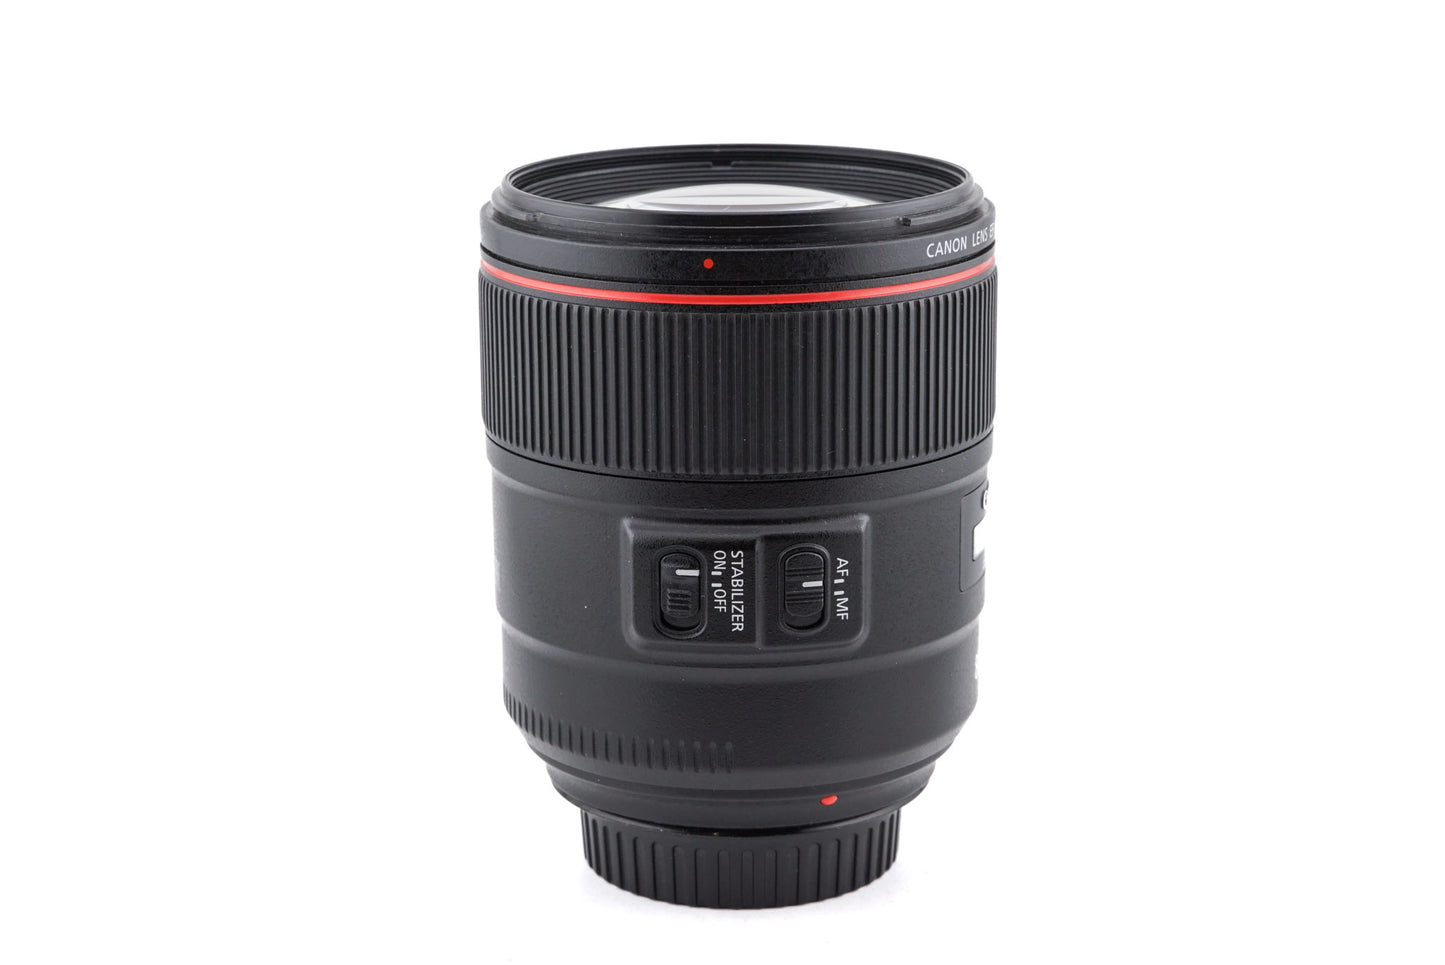 Canon 85mm f1.4 L IS USM